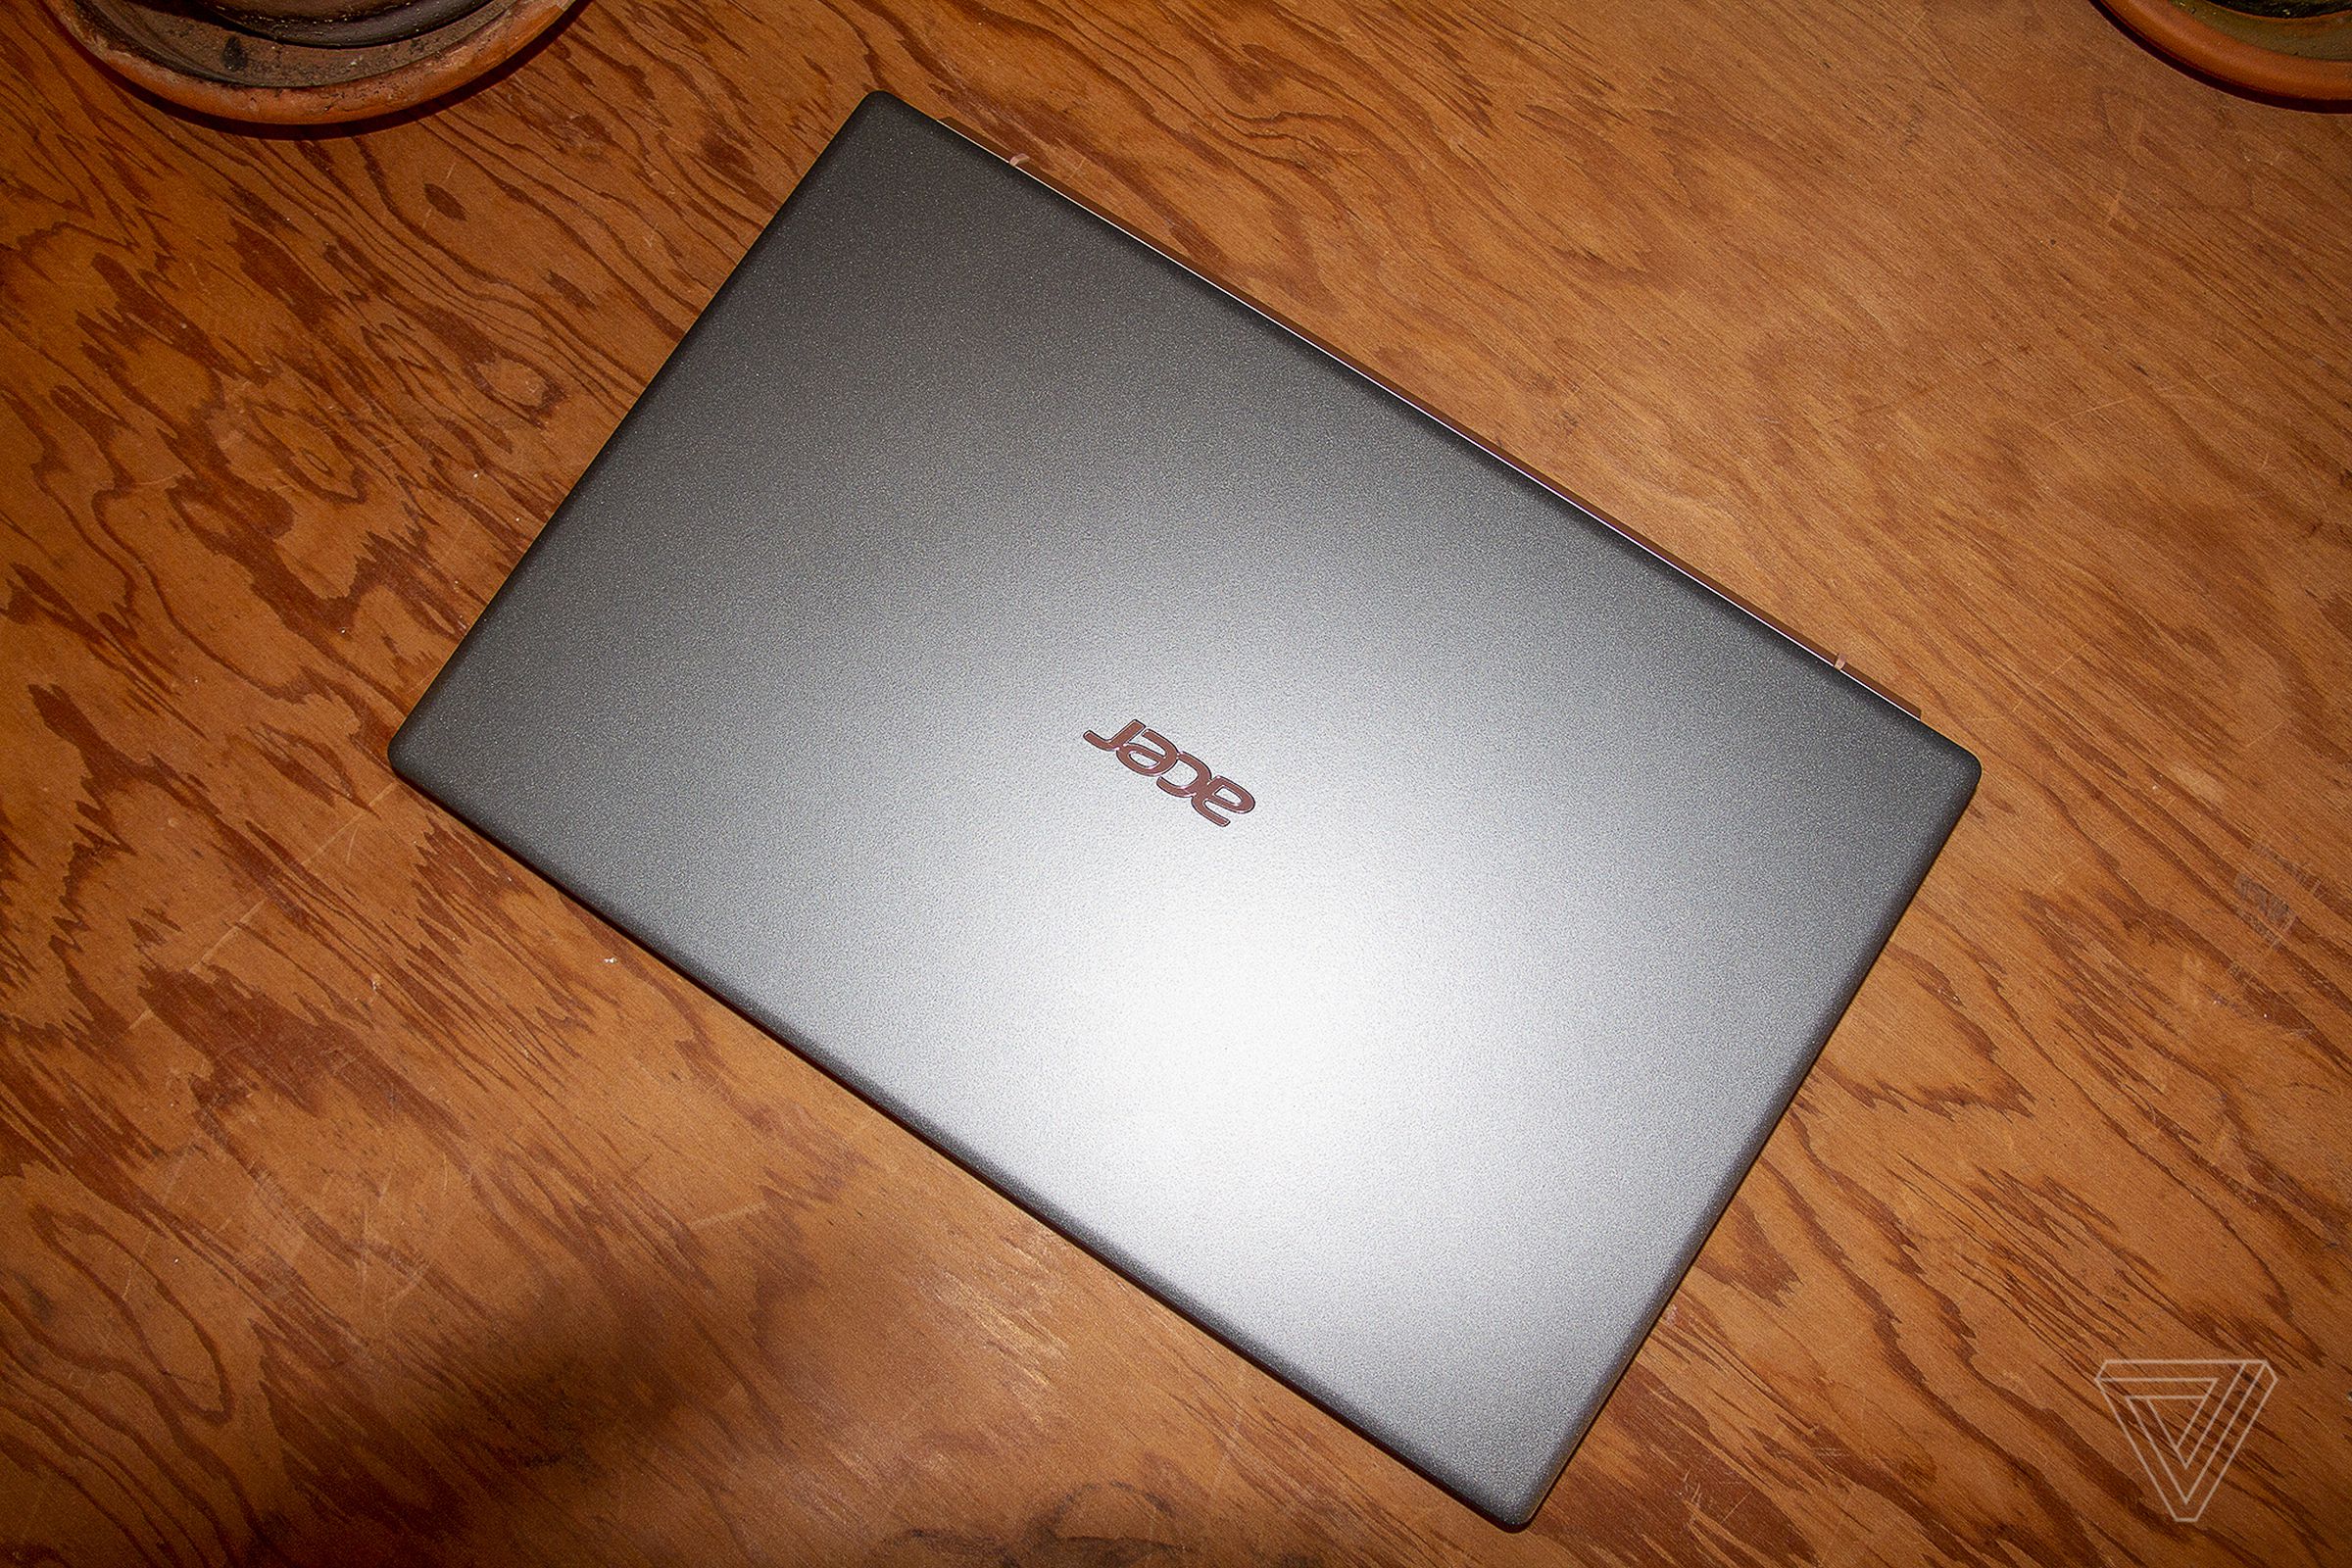 The Acer Swift 5 lid, closed, seen from above.